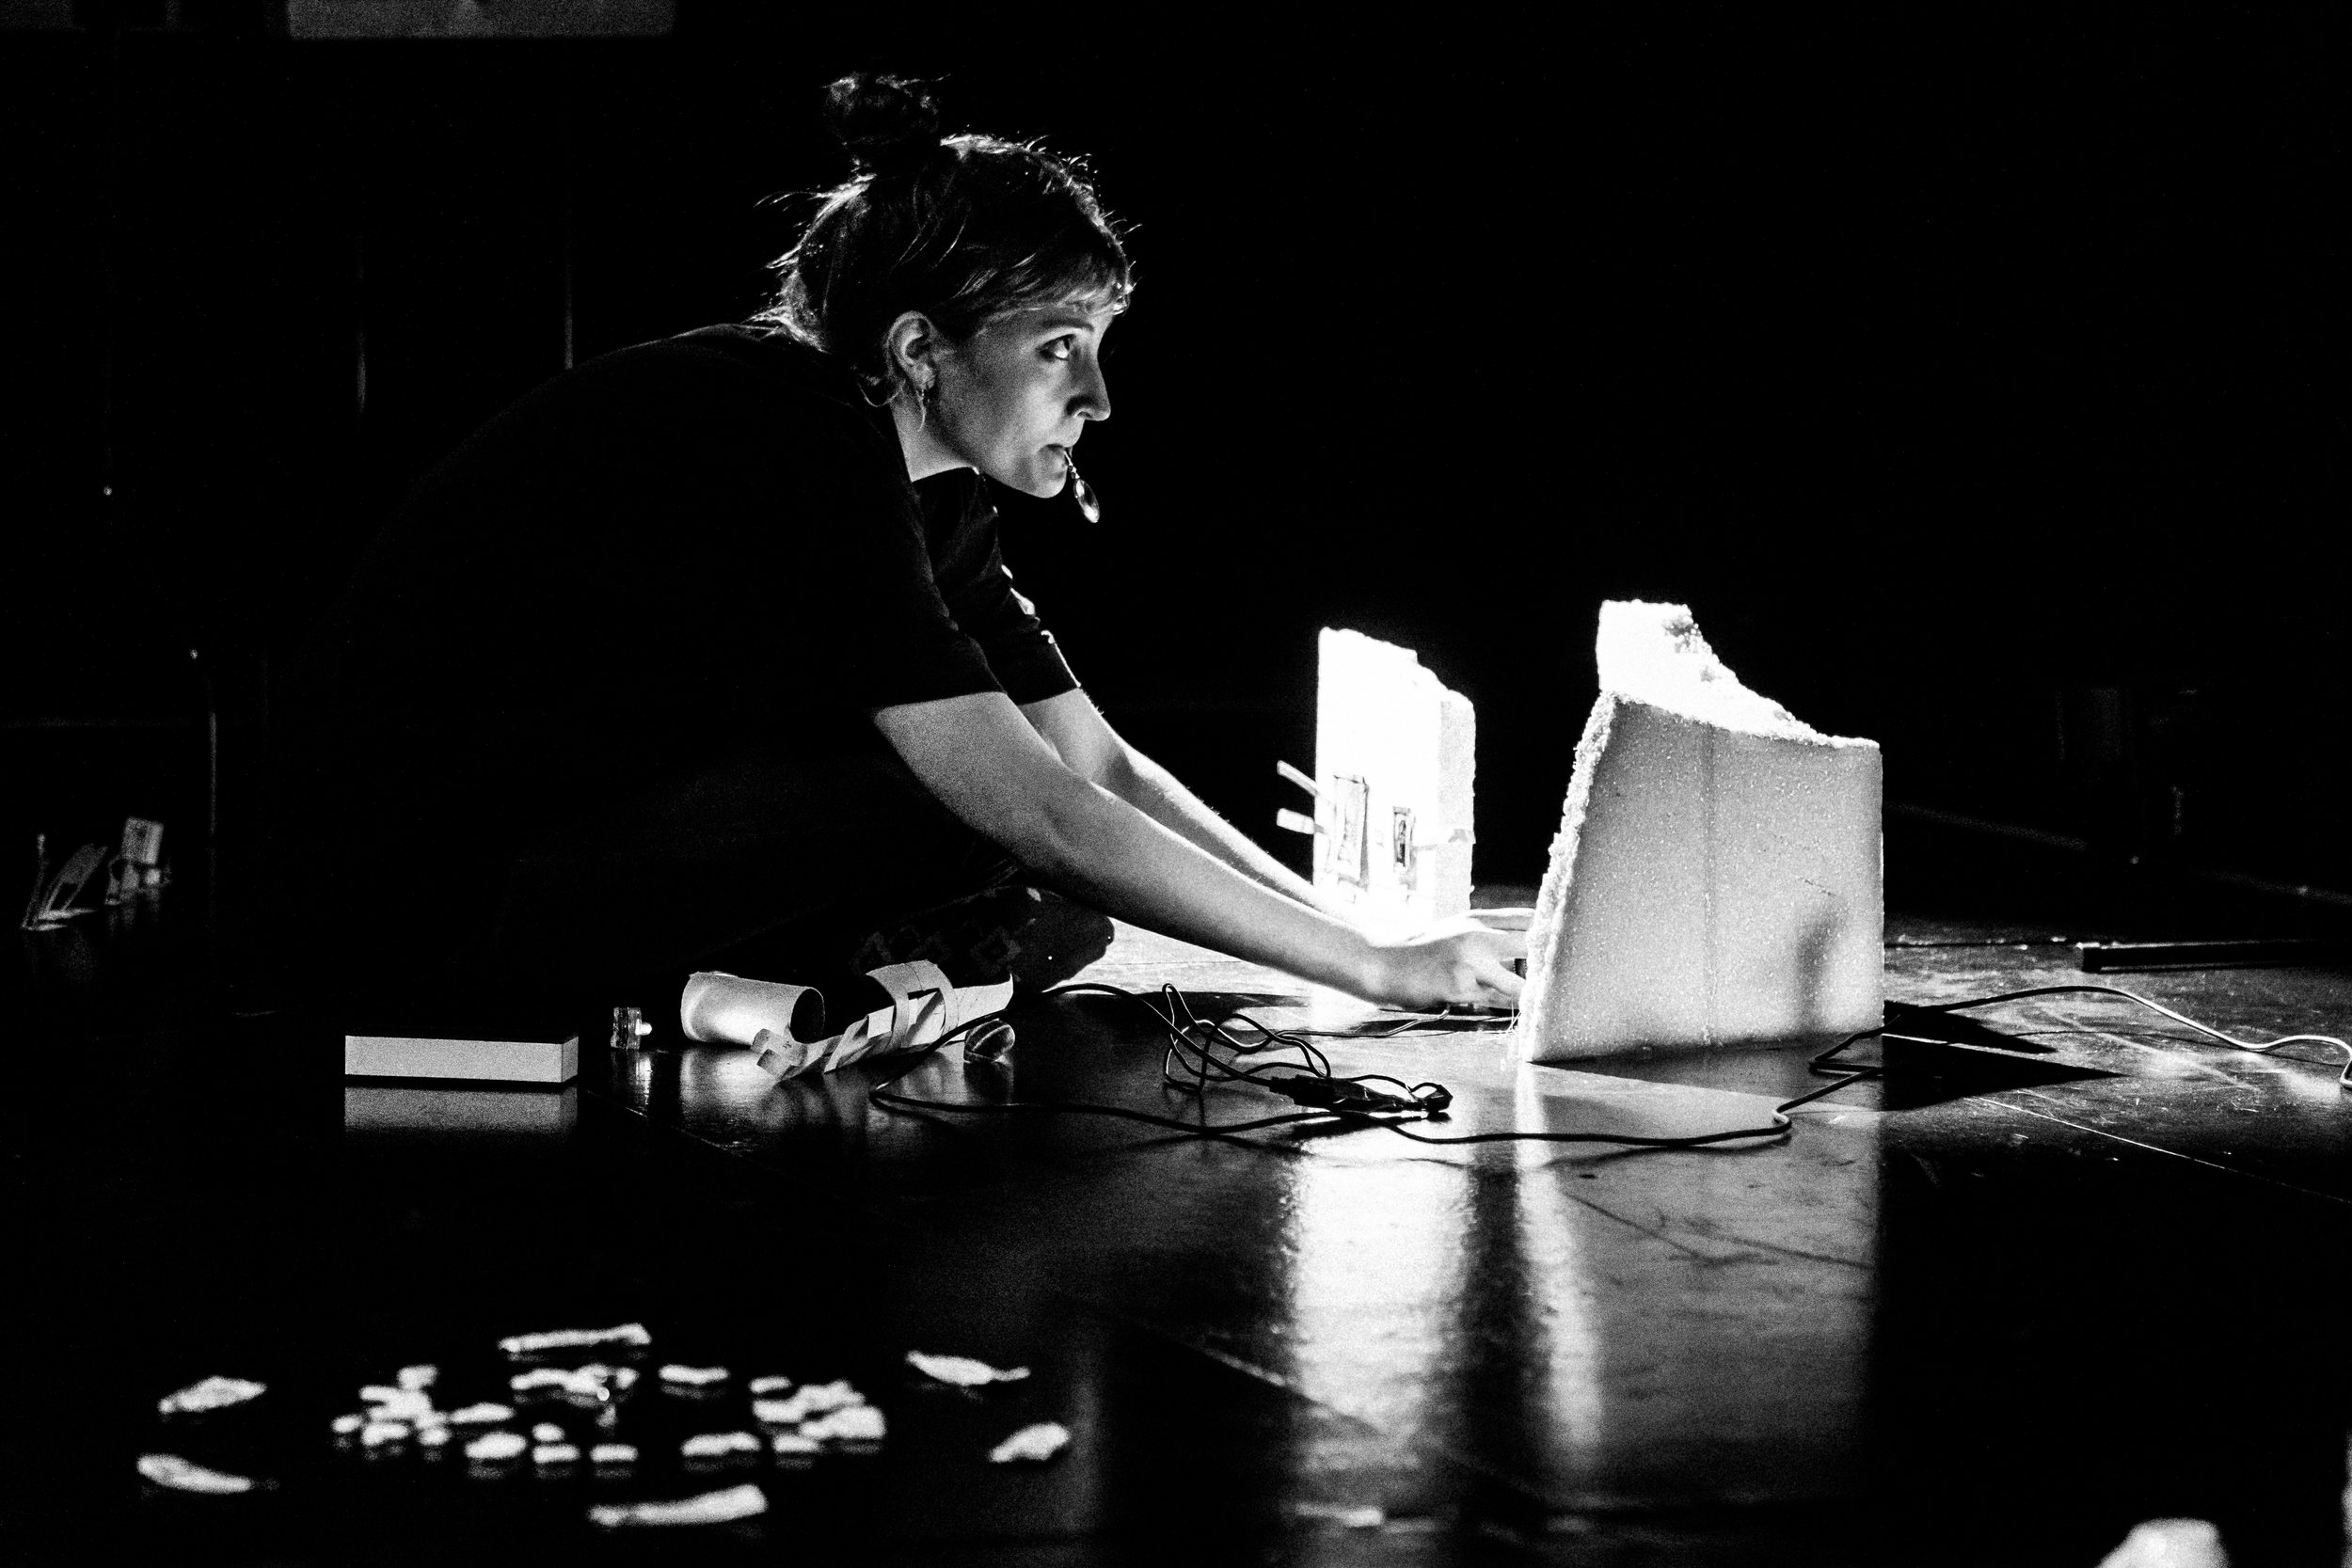 The image is black and white. The performer knees down and concentrates on something out of frame. She has a tiny magnifying glass in her mouth.